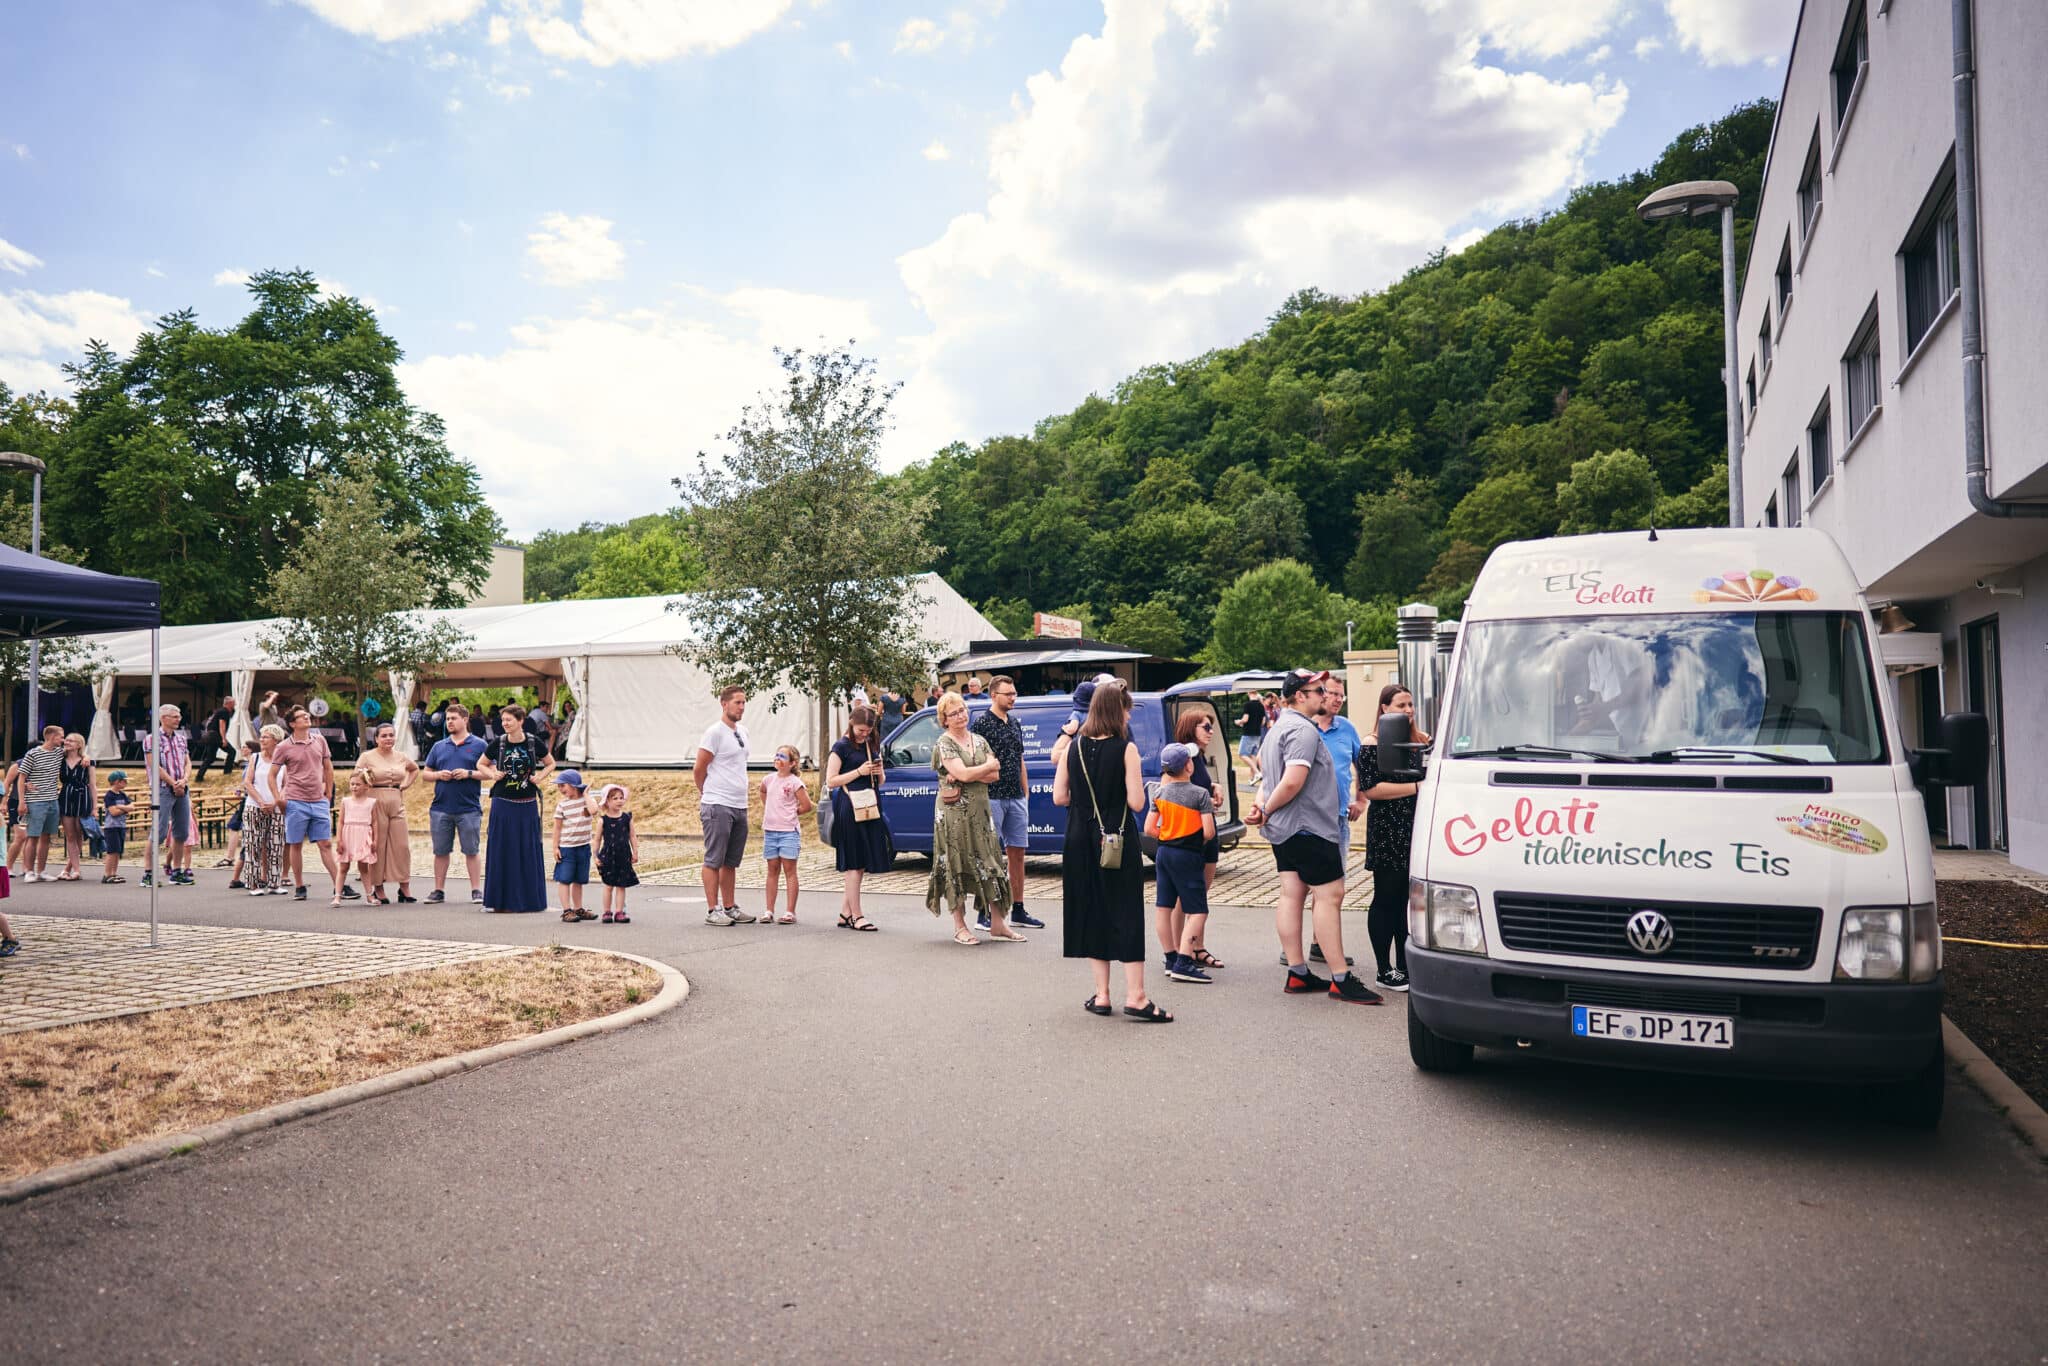 Ice cream truck with a long line of people at the Summer event 2022 | Photo: Anna Schroll